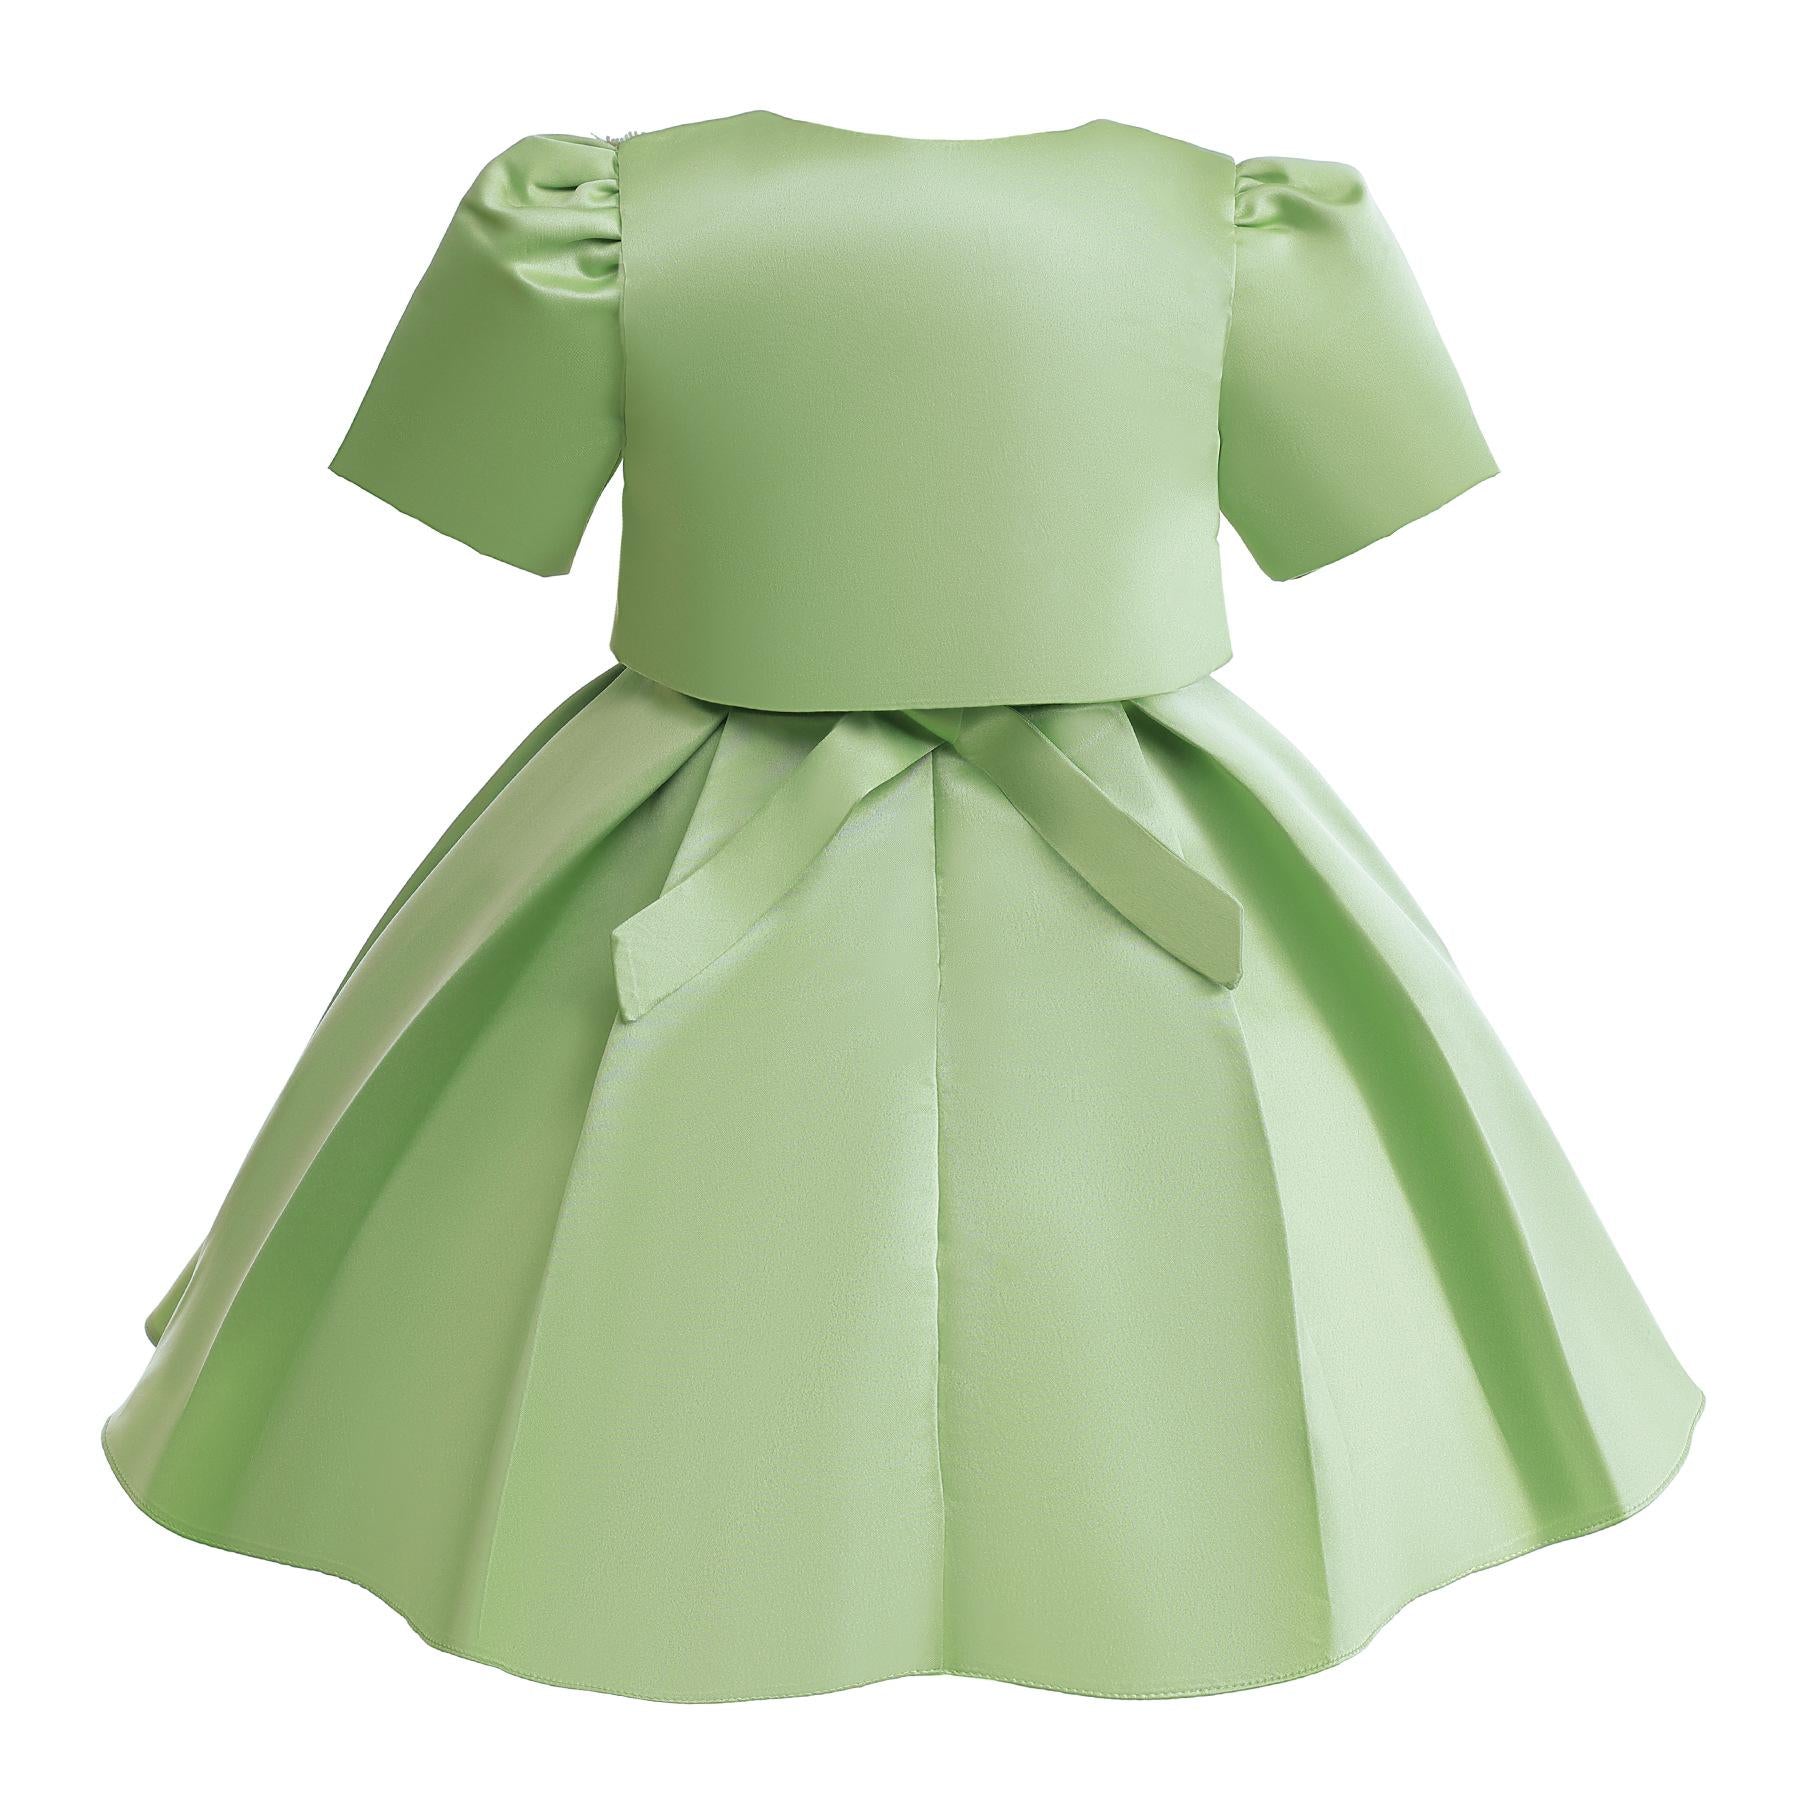 2-10Y Kid Baby Girls Princess Dress Set Sleeveless Straps Puffy Dress With Coat 2Pcs For Party Performance Green Catpapa ZT-T001